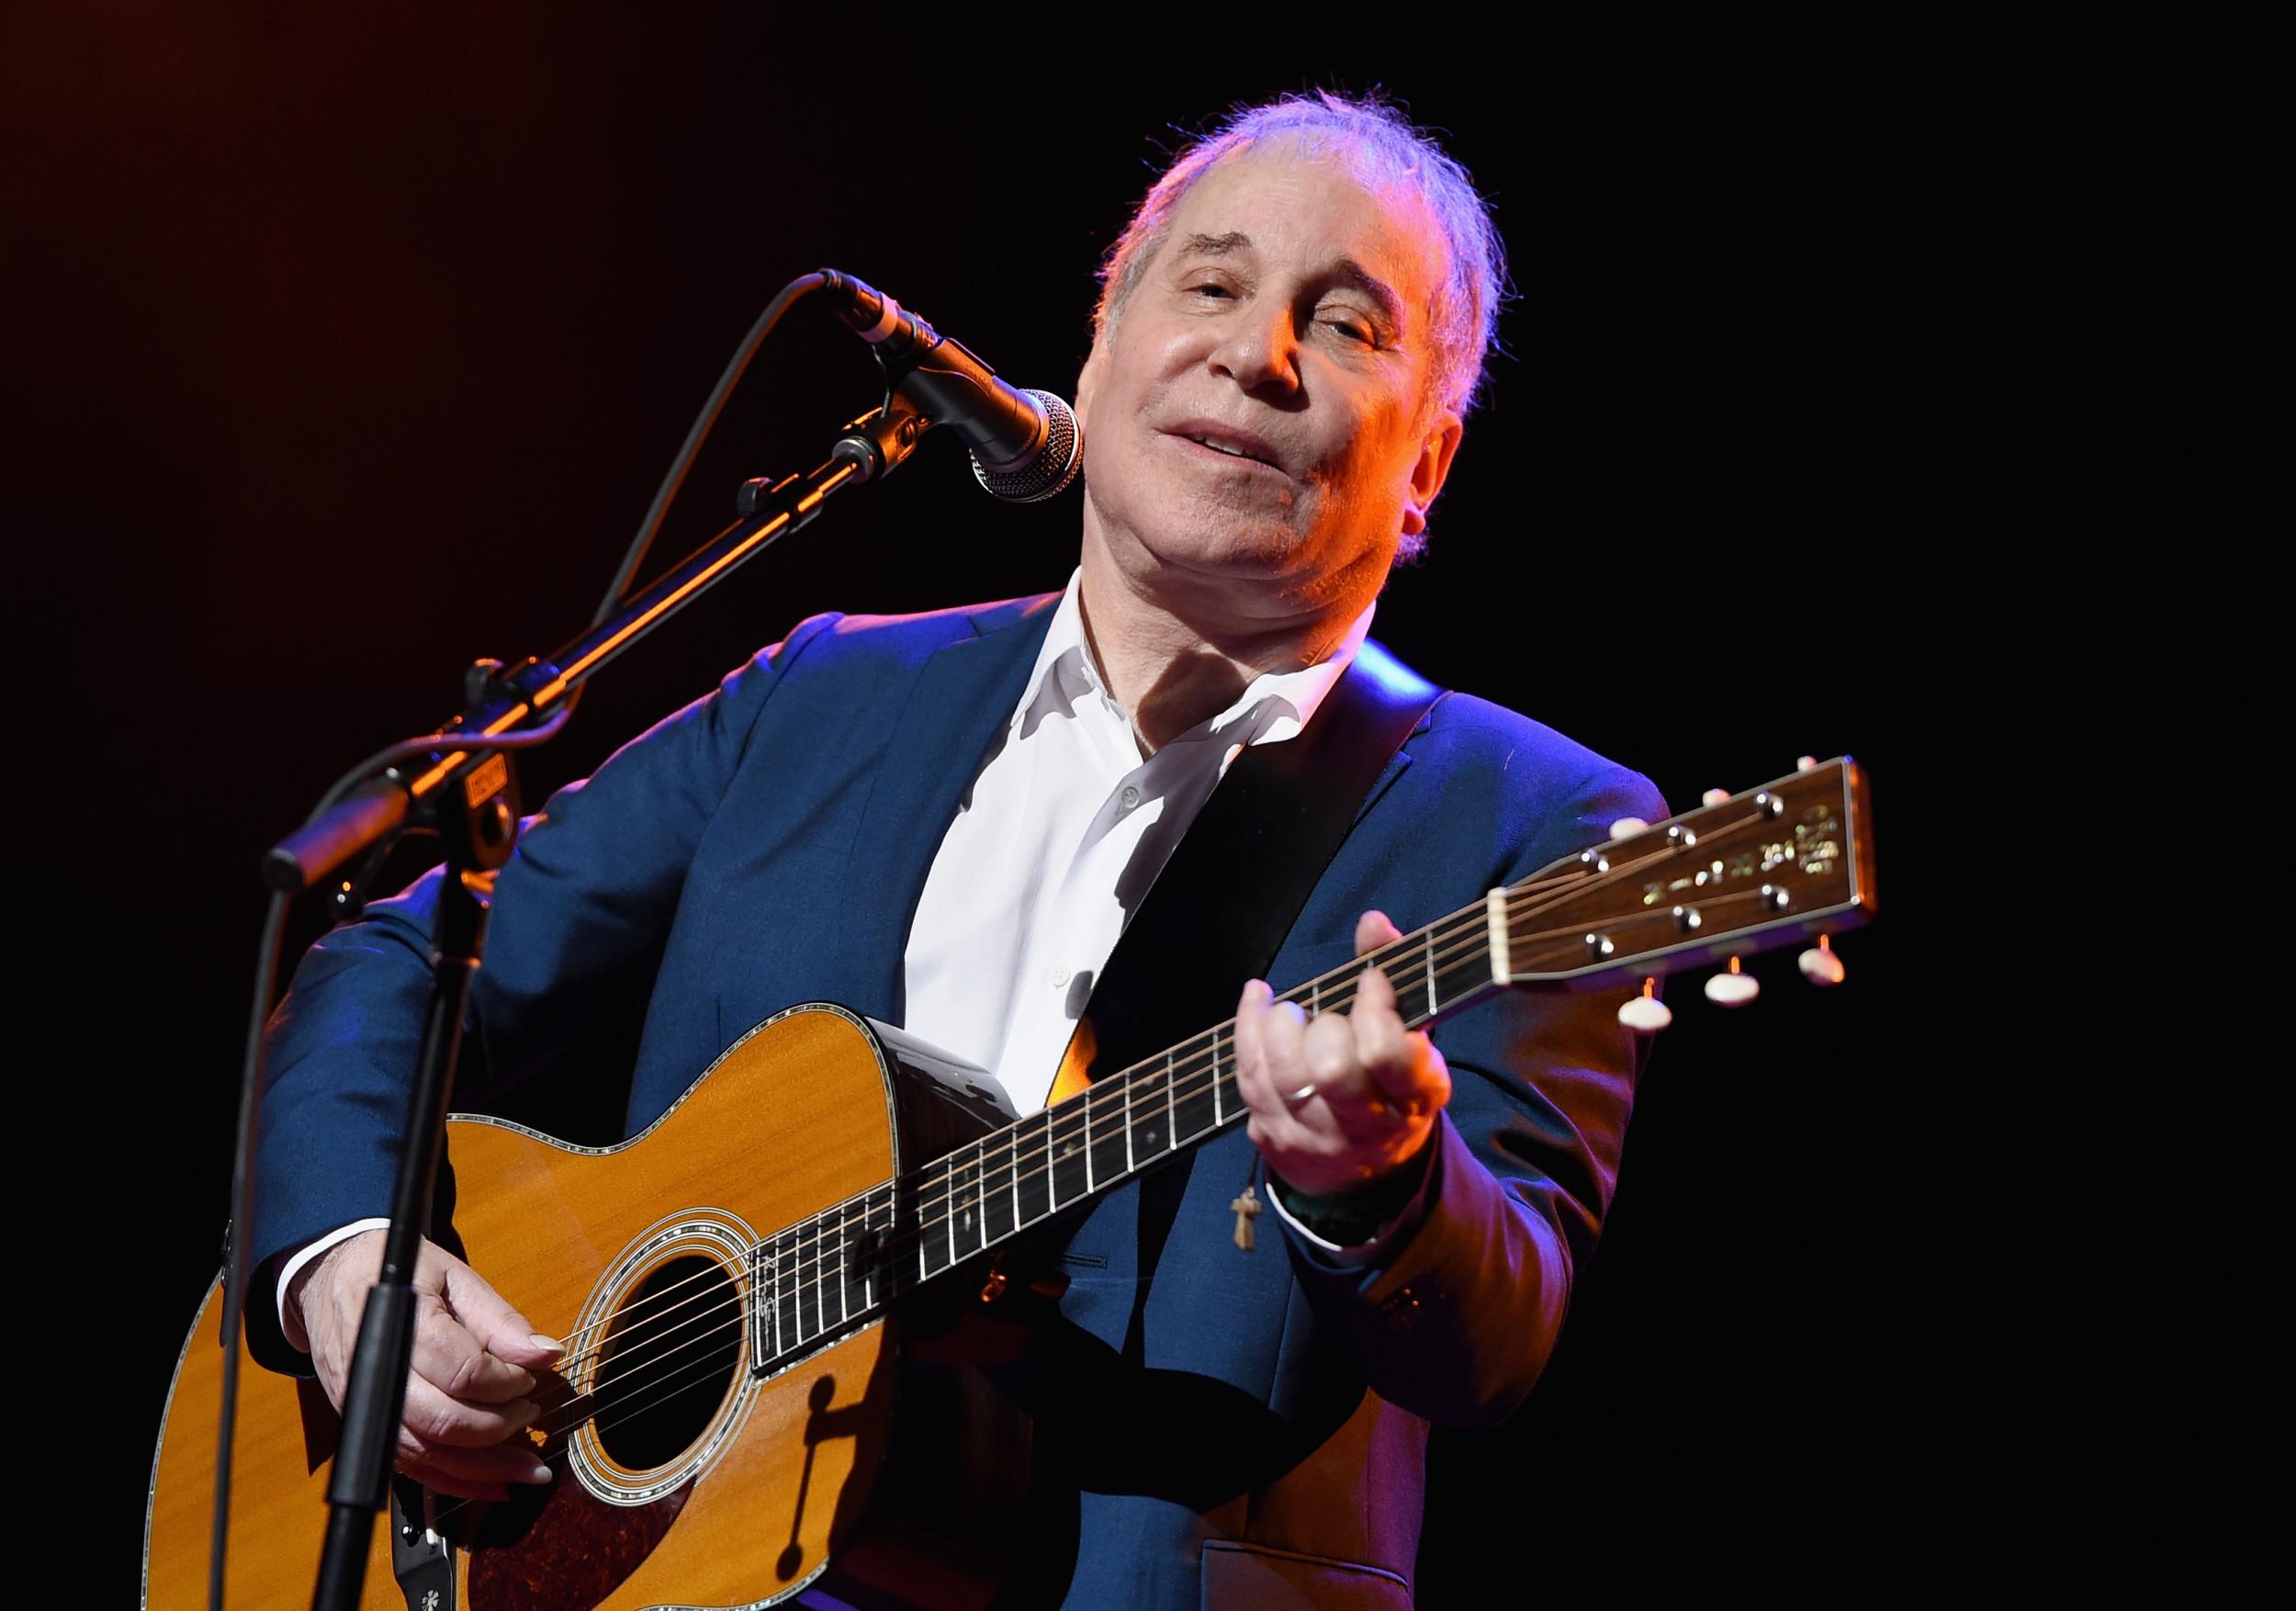 With the likes of Paul Simon calling it a day, it seems the era of rock retirements has dawned